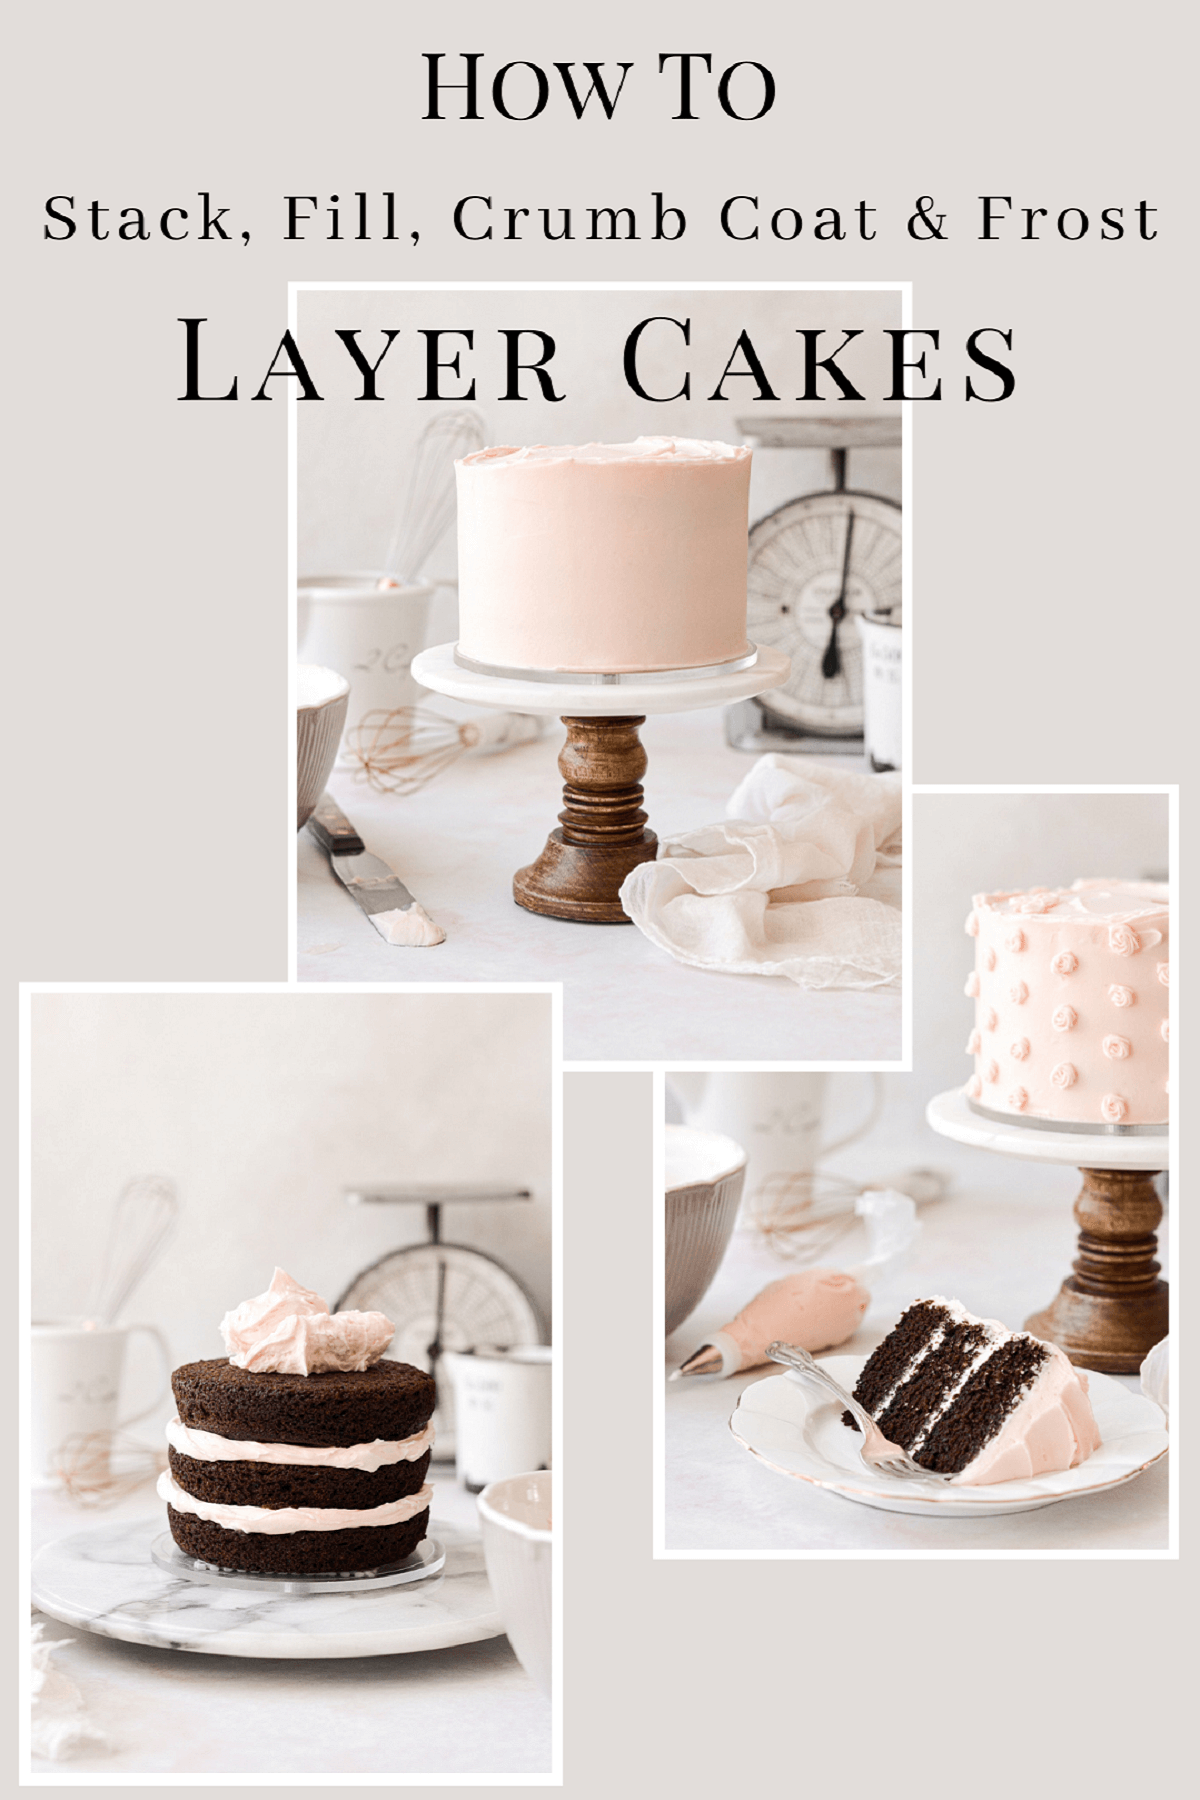 A graphic on how to stack, fill, crumb coat and frost layer cakes.